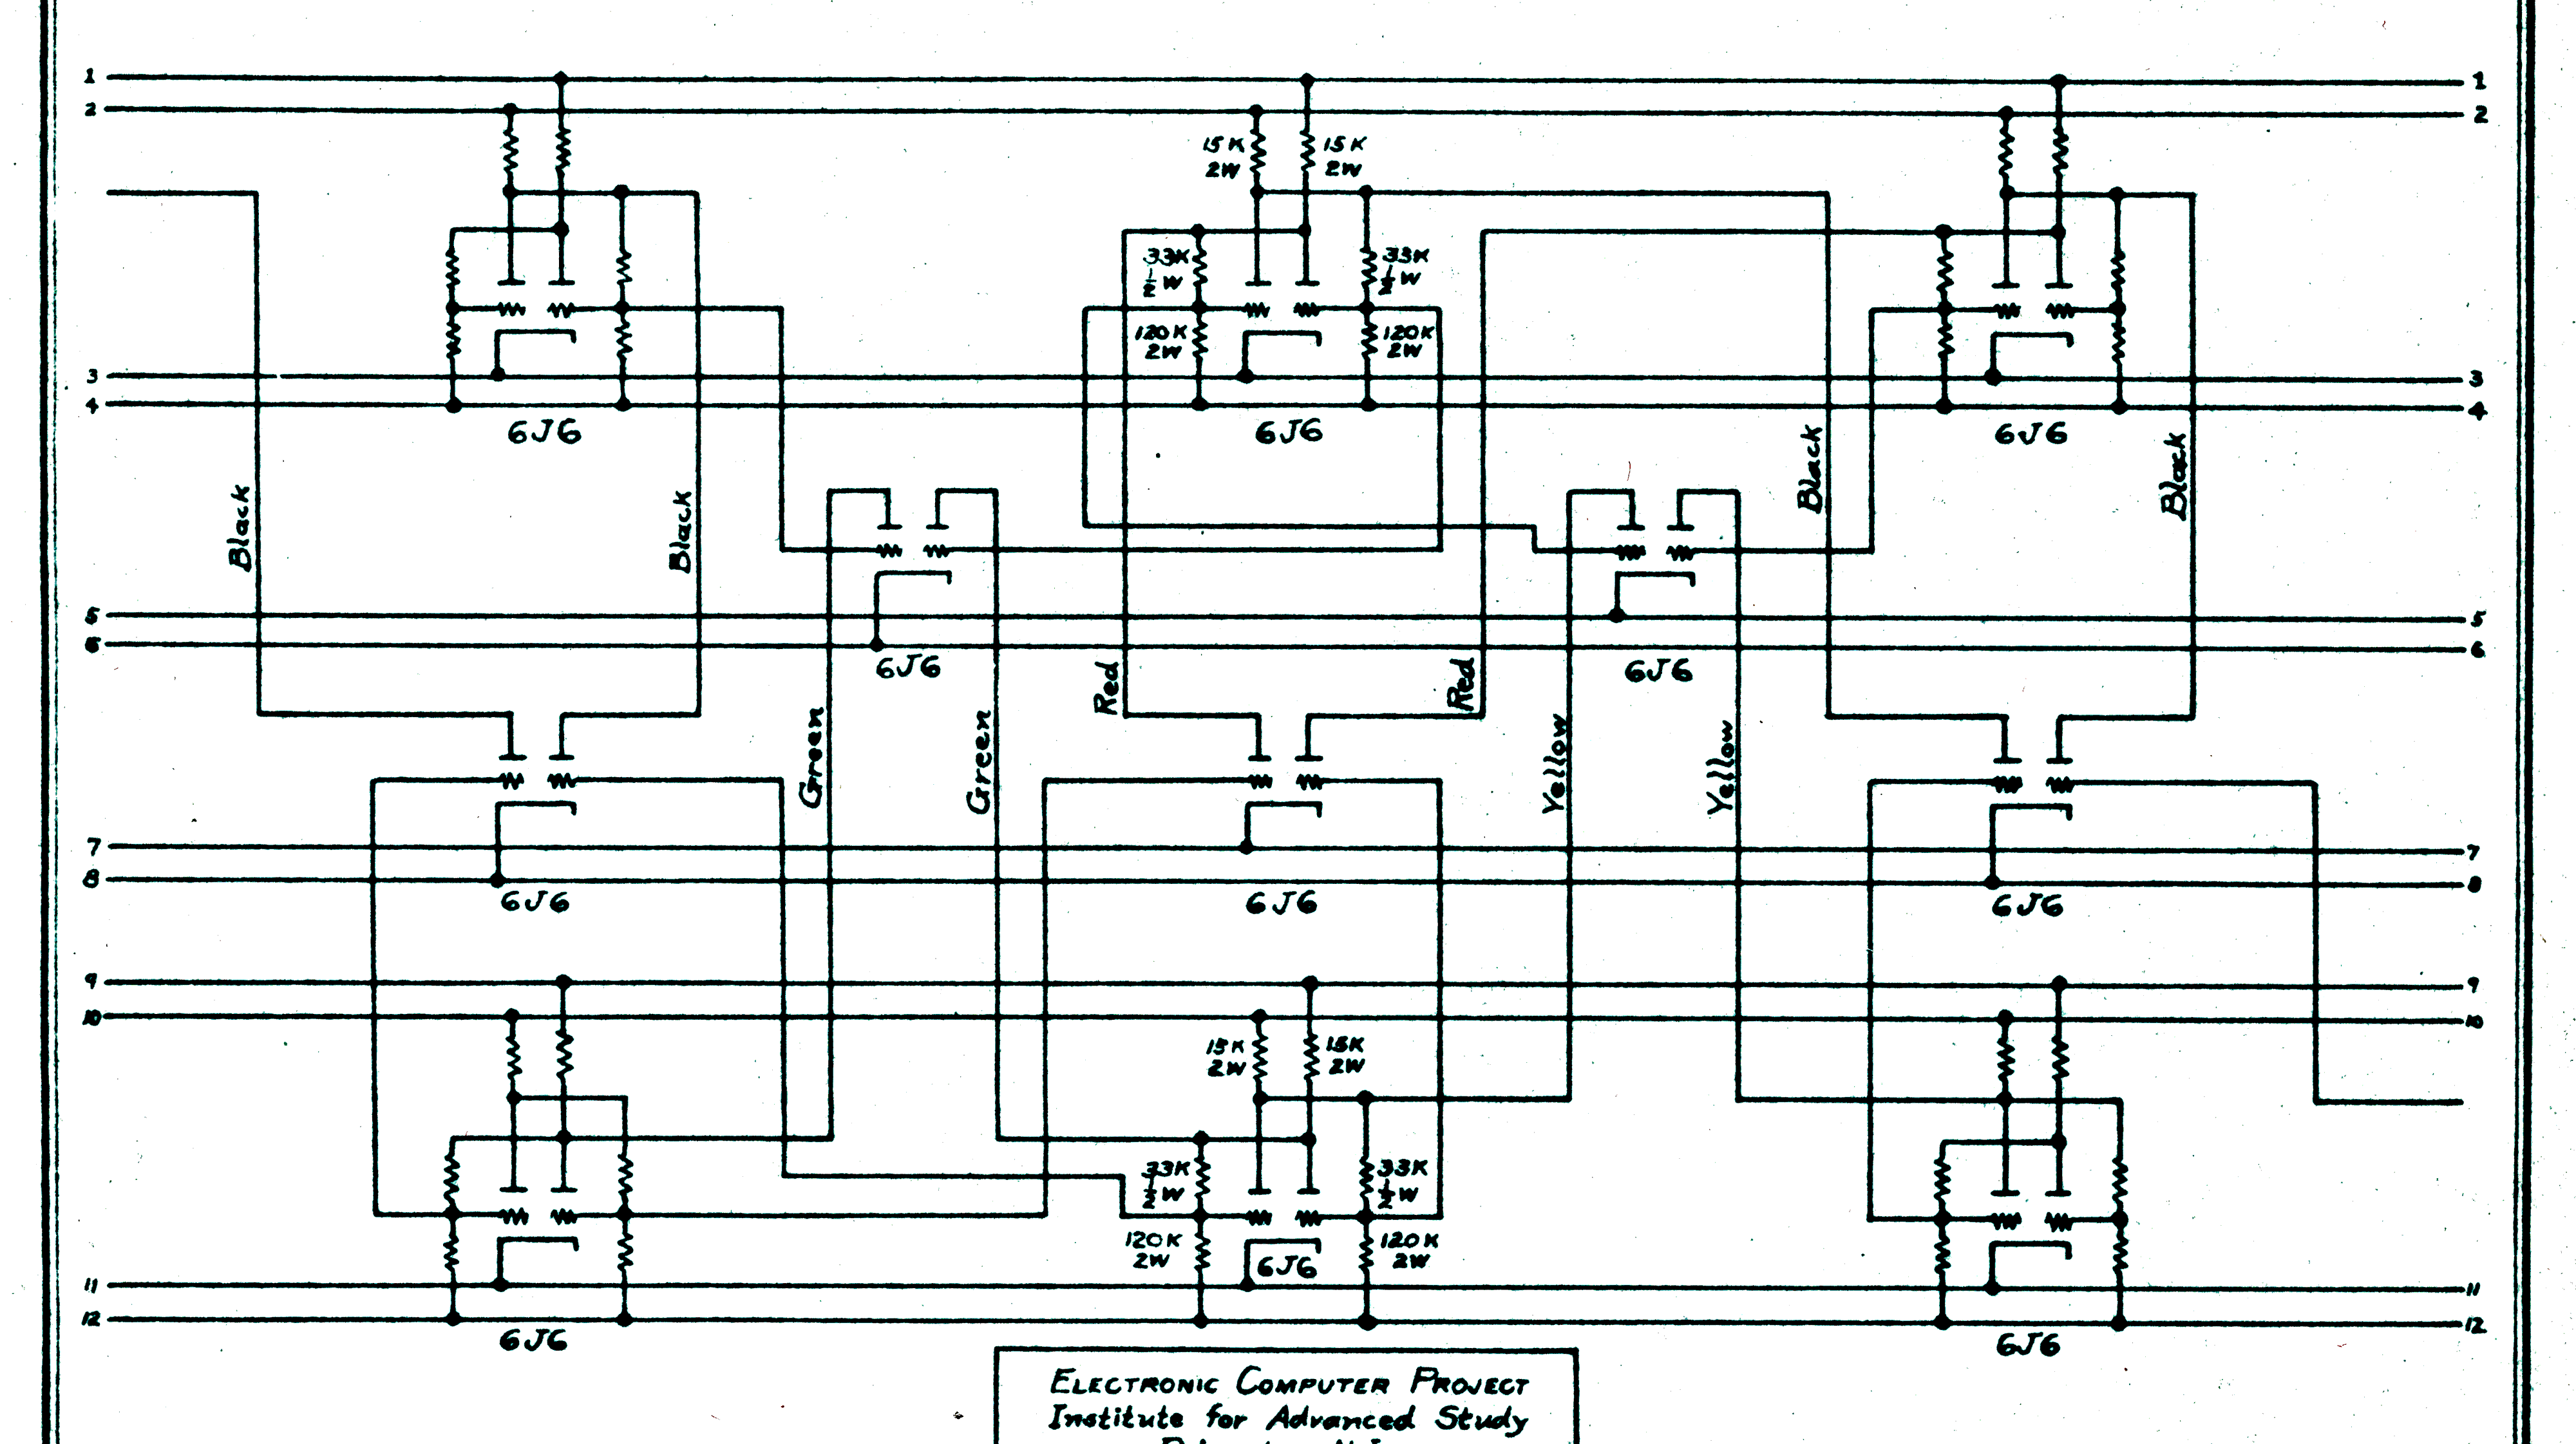 Diagram of circuit of Shift Register ('Shifting register') in IAS computer